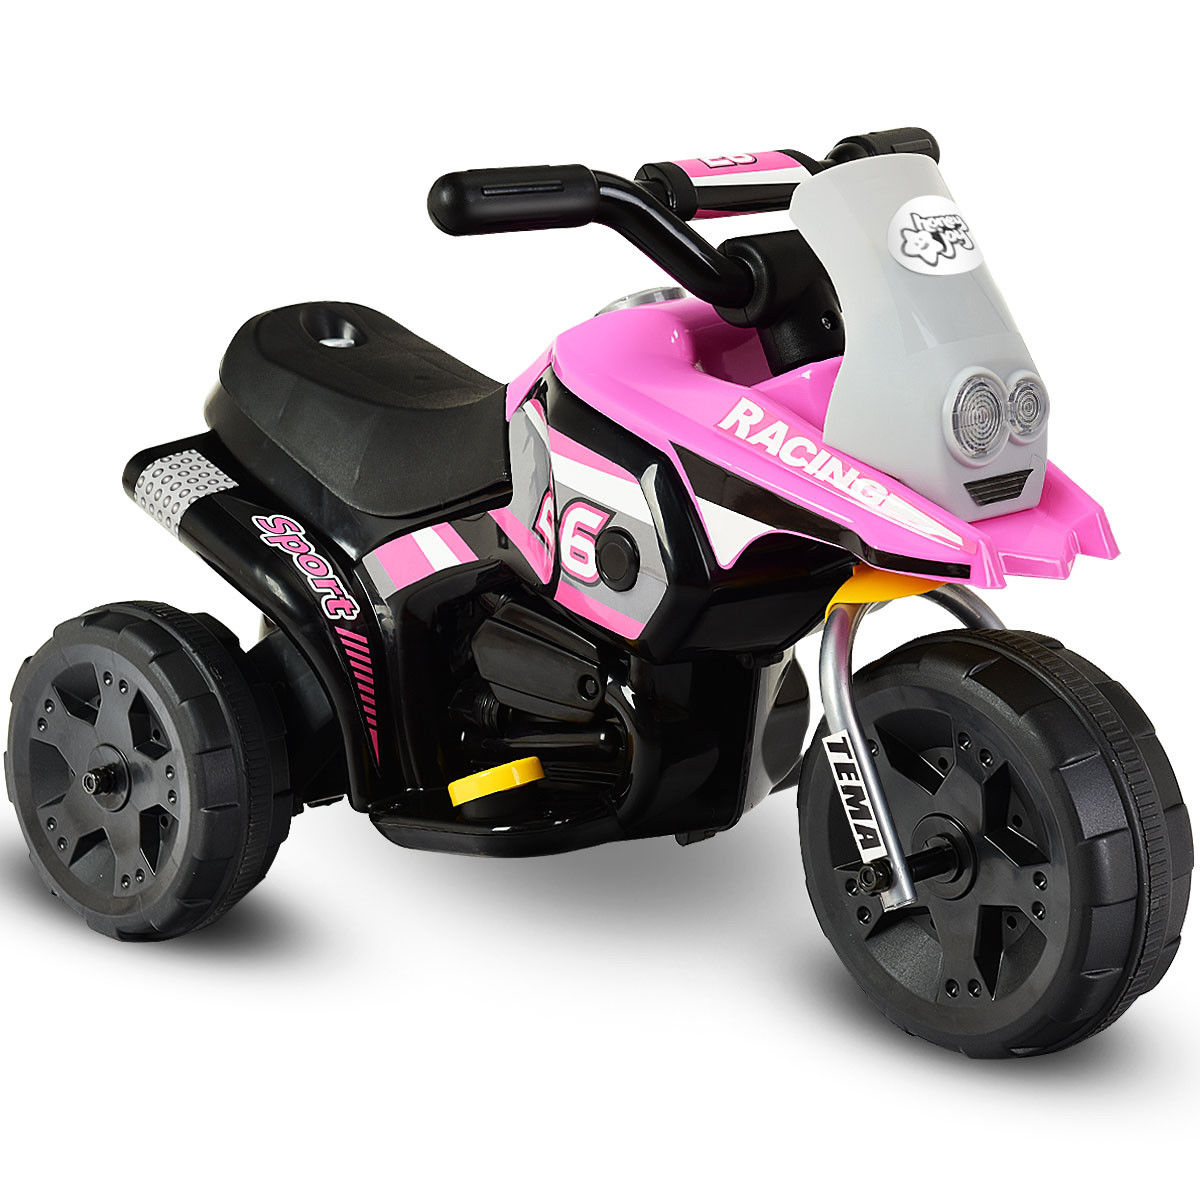 Costway: 6V Kids Ride On Motorcycle Battery Powered 3 Wheel Bicycle